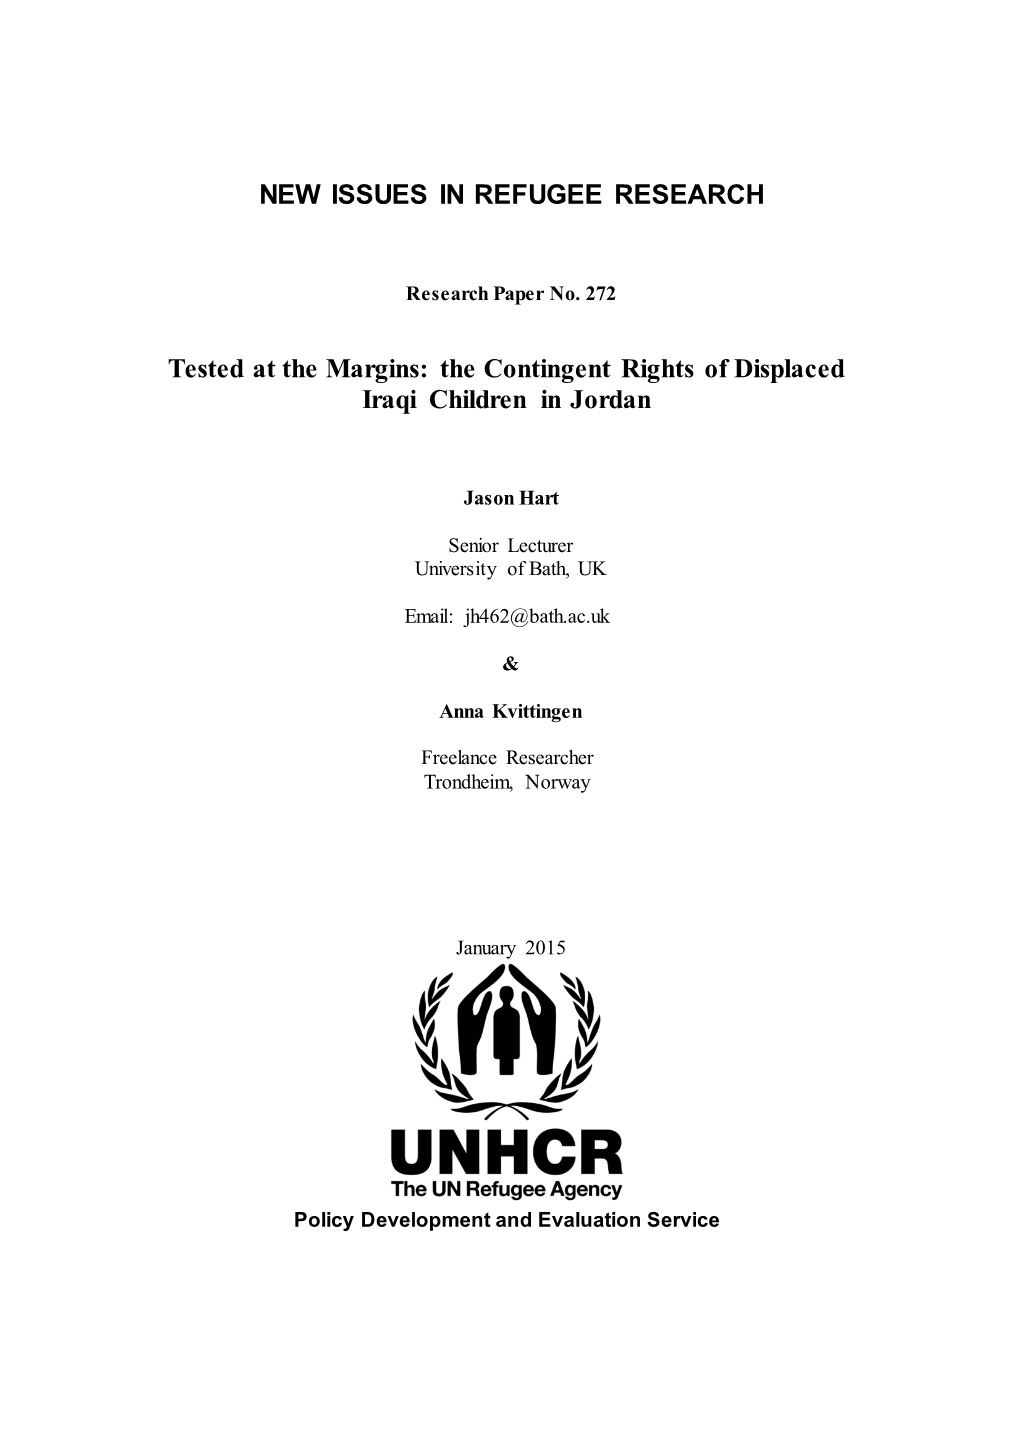 The Contingent Rights of Displaced Iraqi Children in Jordan